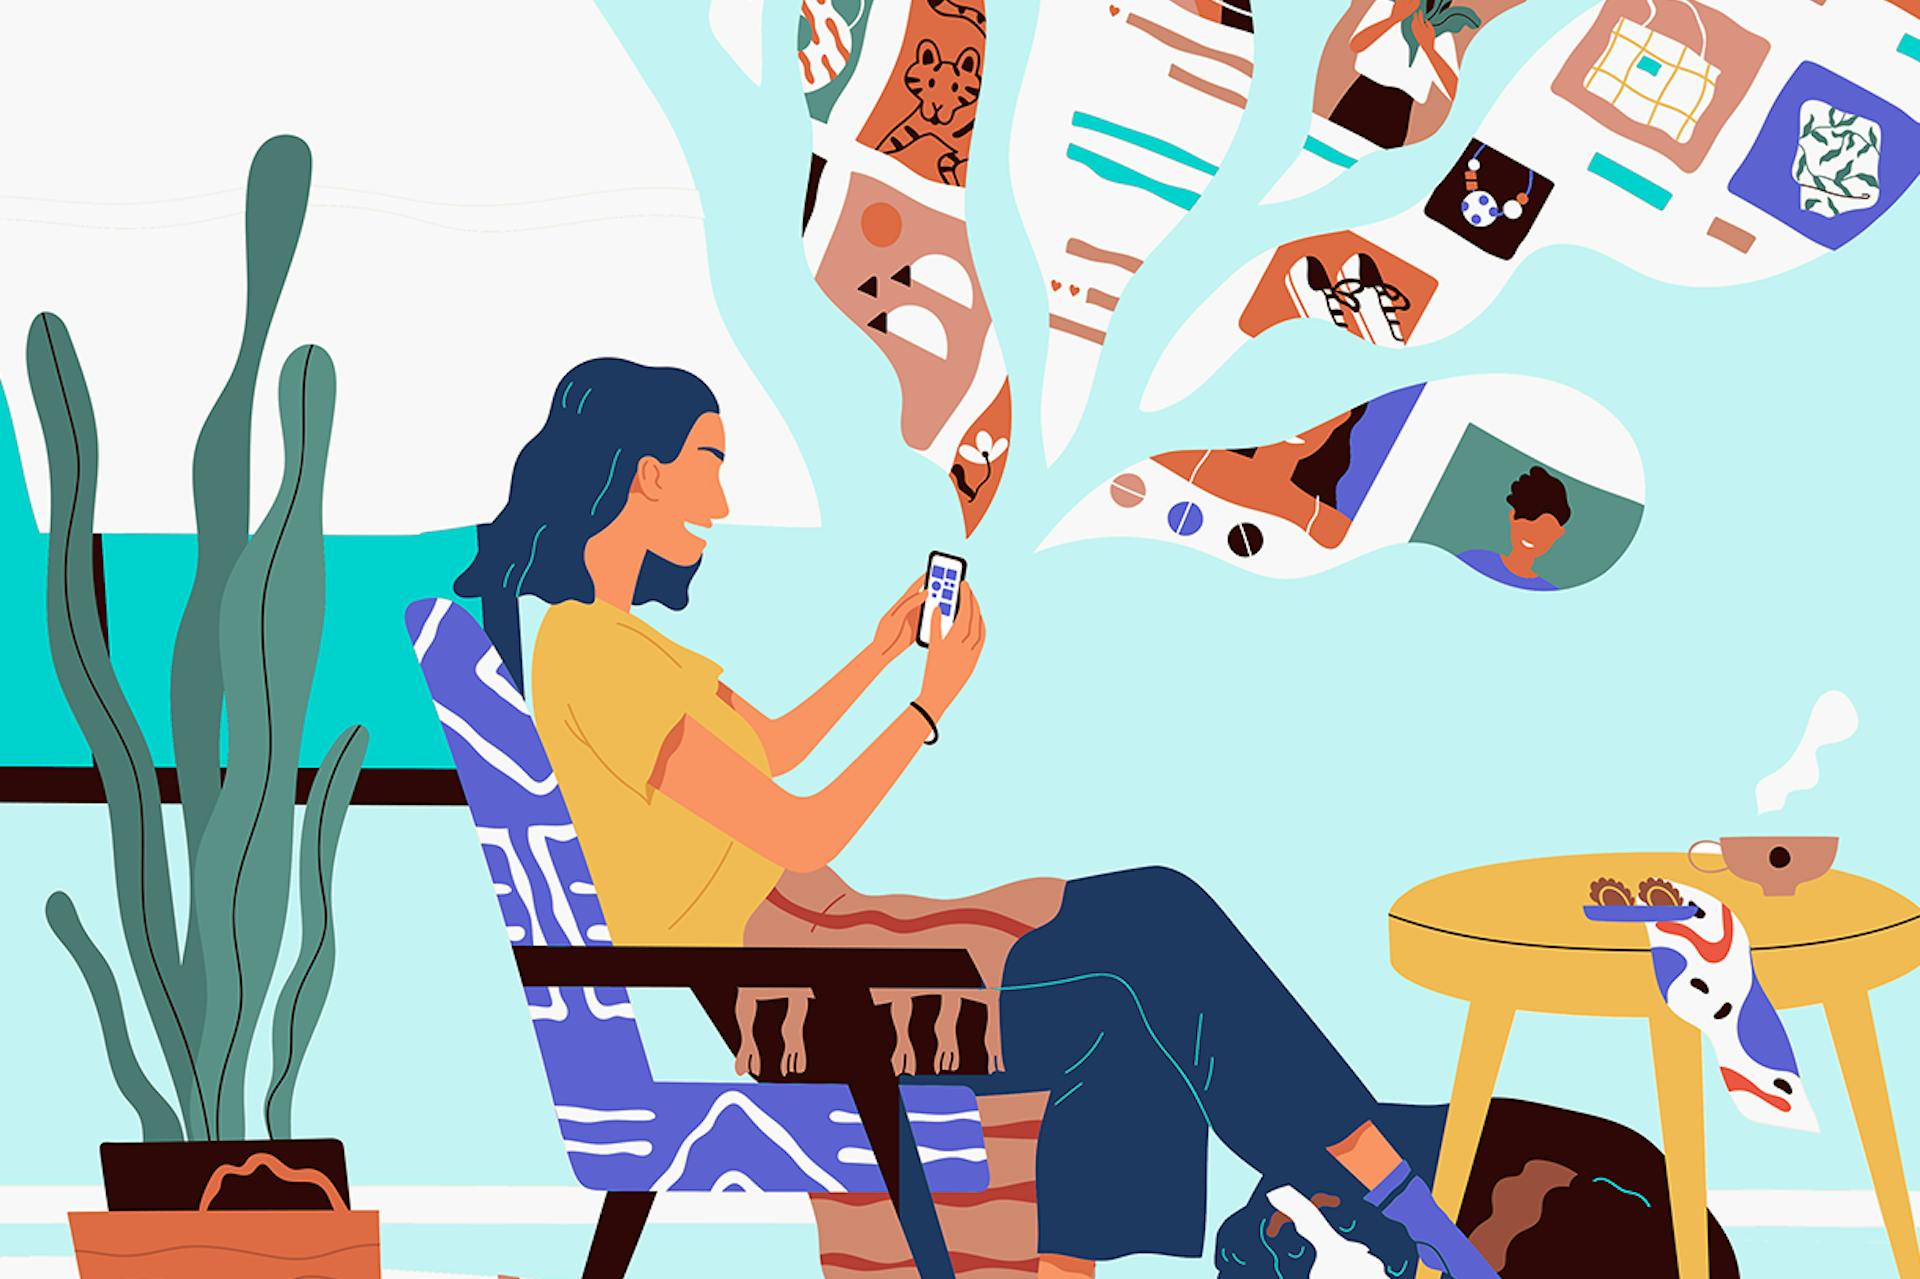 Comic image of a person sitting on her chair scrolling through her phone